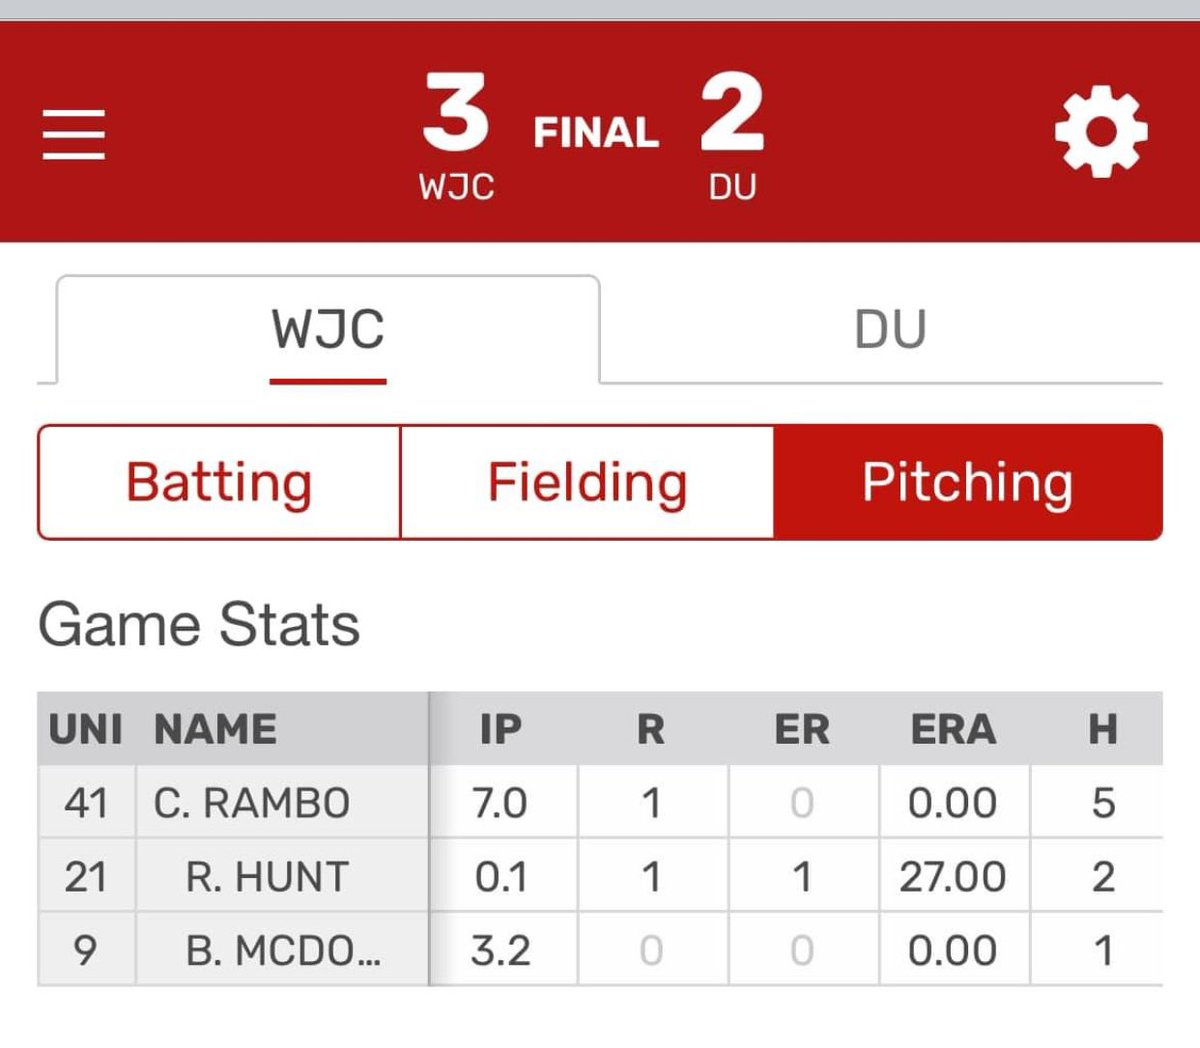 Our guy @4CharlieRambo with a gem on the mound for @Jewell_Baseball against Drury to propel the Cardinals to the second round of the GLVC Baseball Conference Tournament! Proud of you Charlie, keep doing your thing!! #LVPride #OnceAndAlways